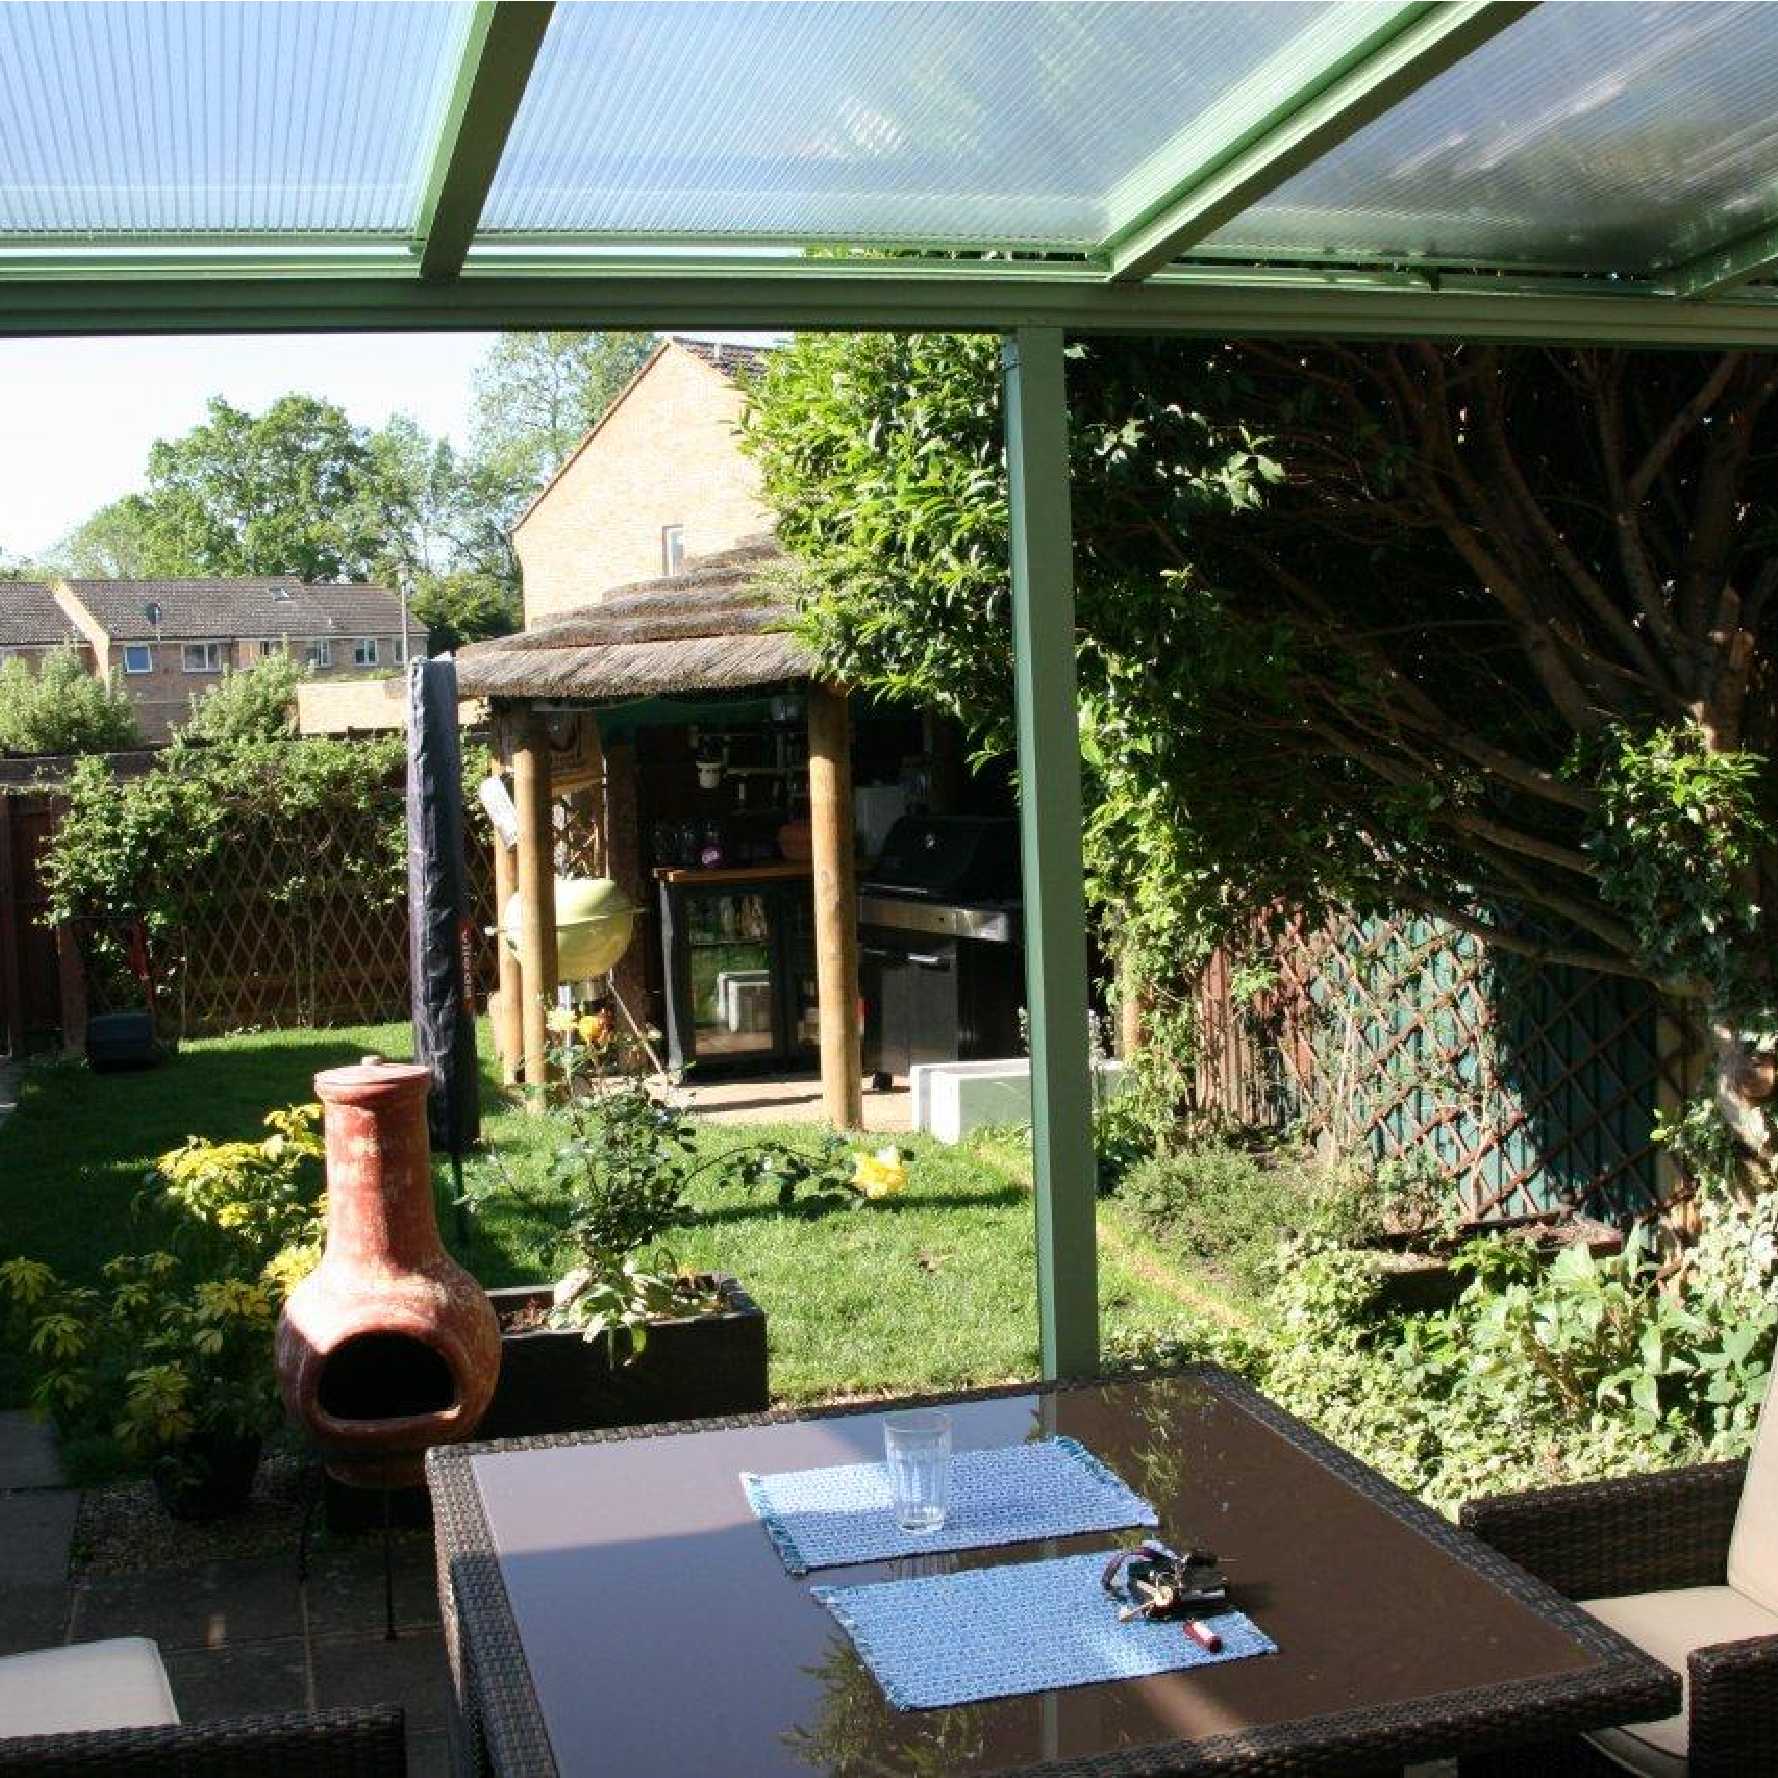 Affordable Omega Smart Lean-To Canopy, White with 16mm Polycarbonate Glazing - 7.4m (W) x 3.0m (P), (4) Supporting Posts